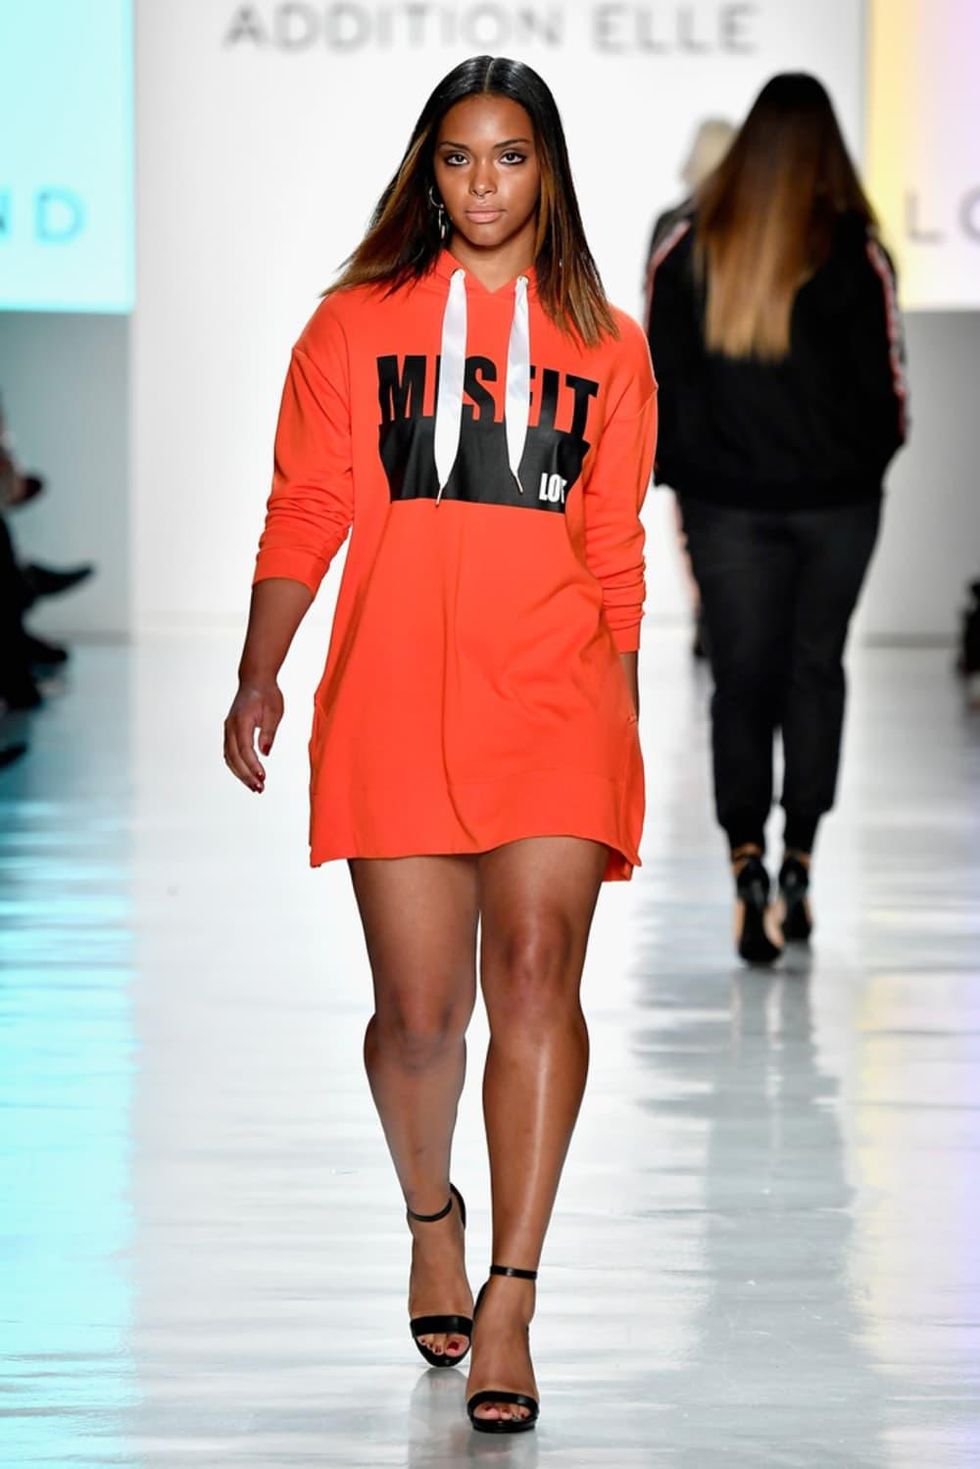 Photo: Ashley Graham walks on the runway at the Addition Elle fashion show  - NYP20170911431 